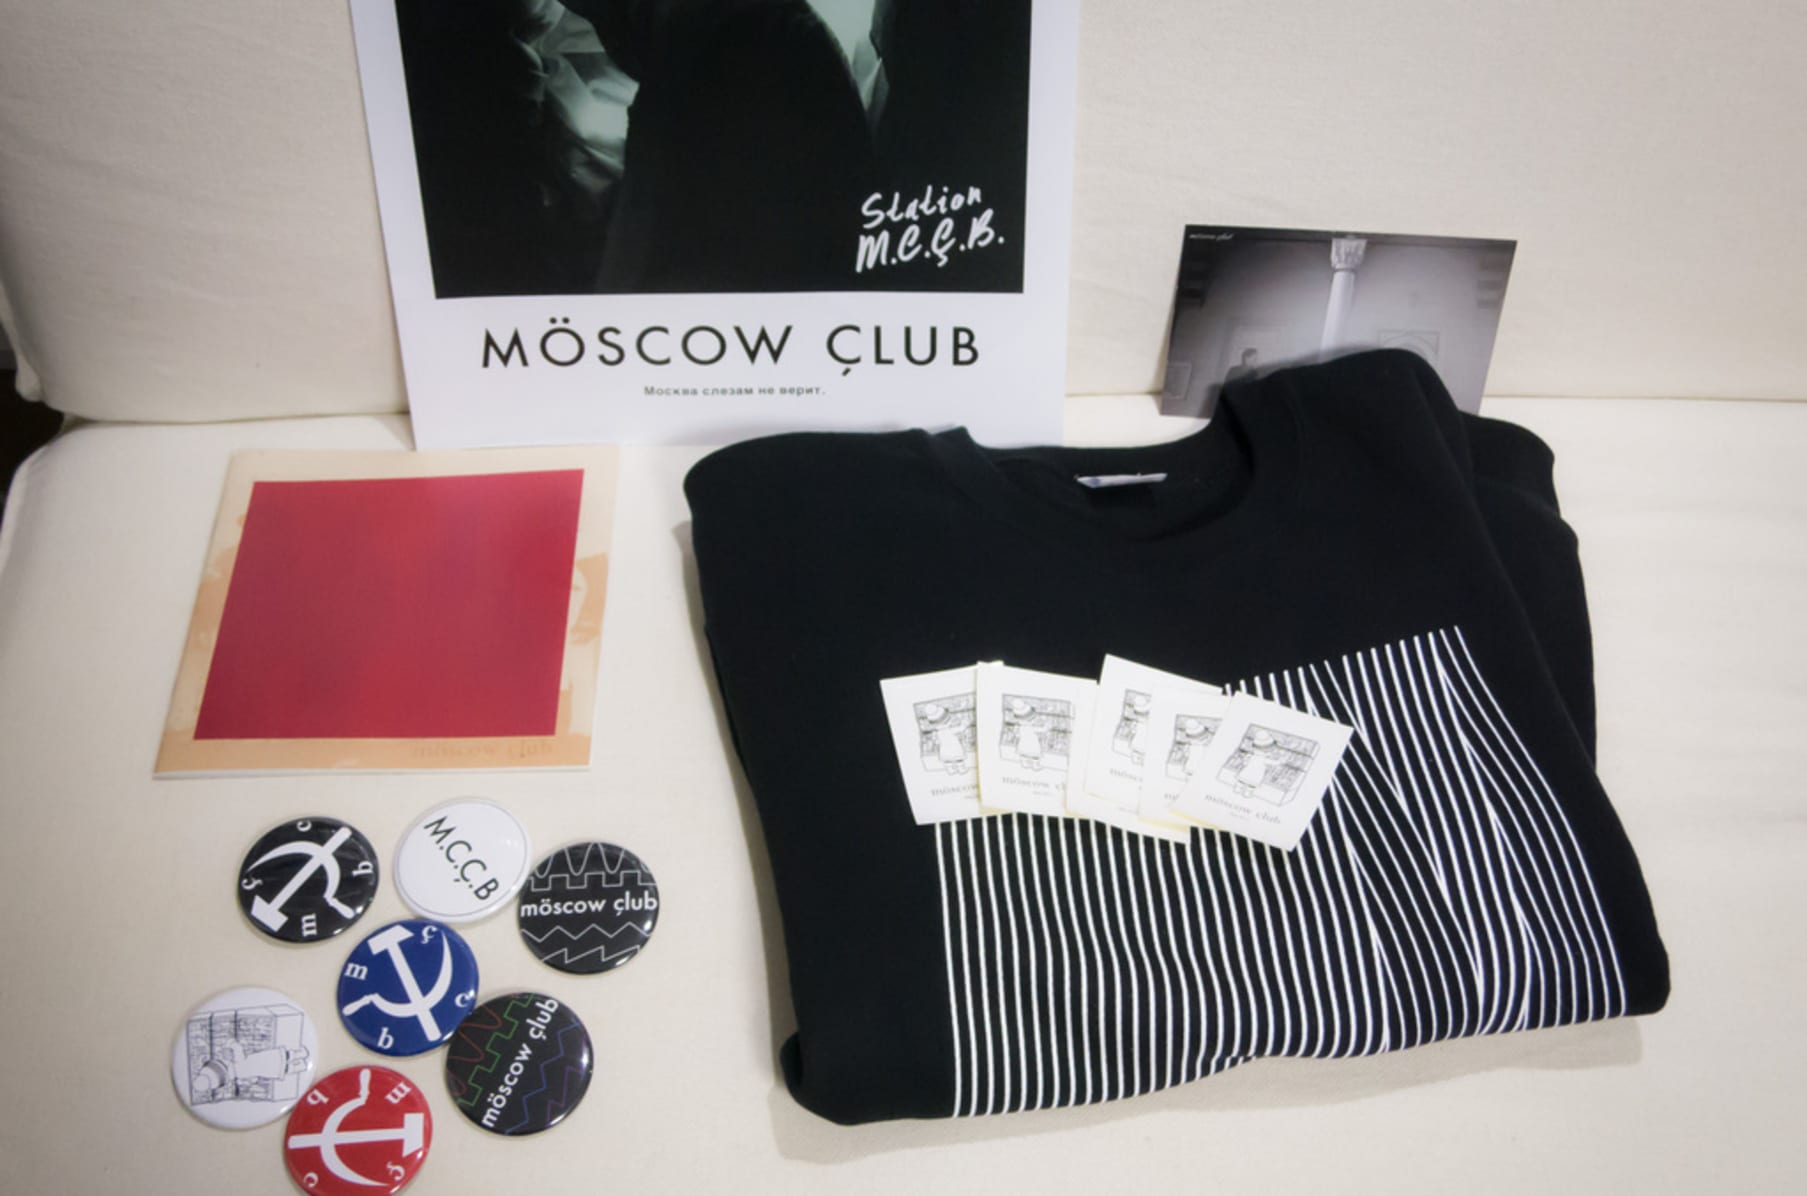 moscow club's first vinyl LP | Indiegogo